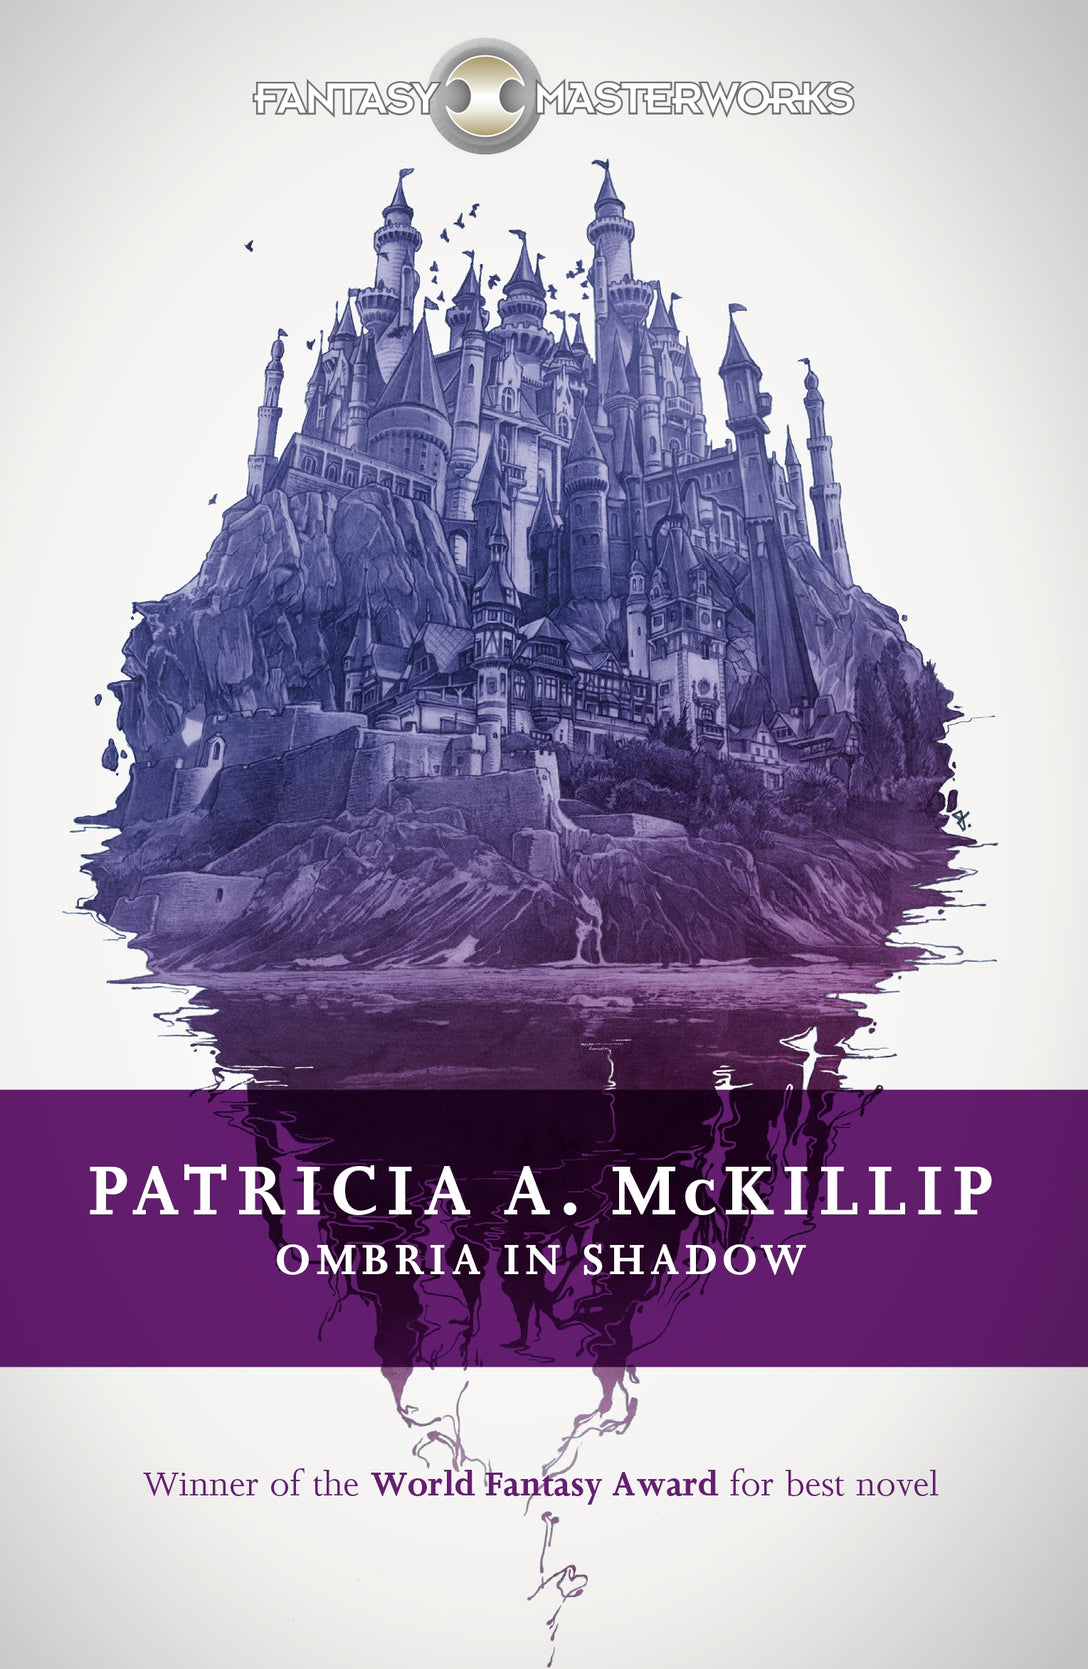 Ombria in Shadow by Patricia A. McKillip